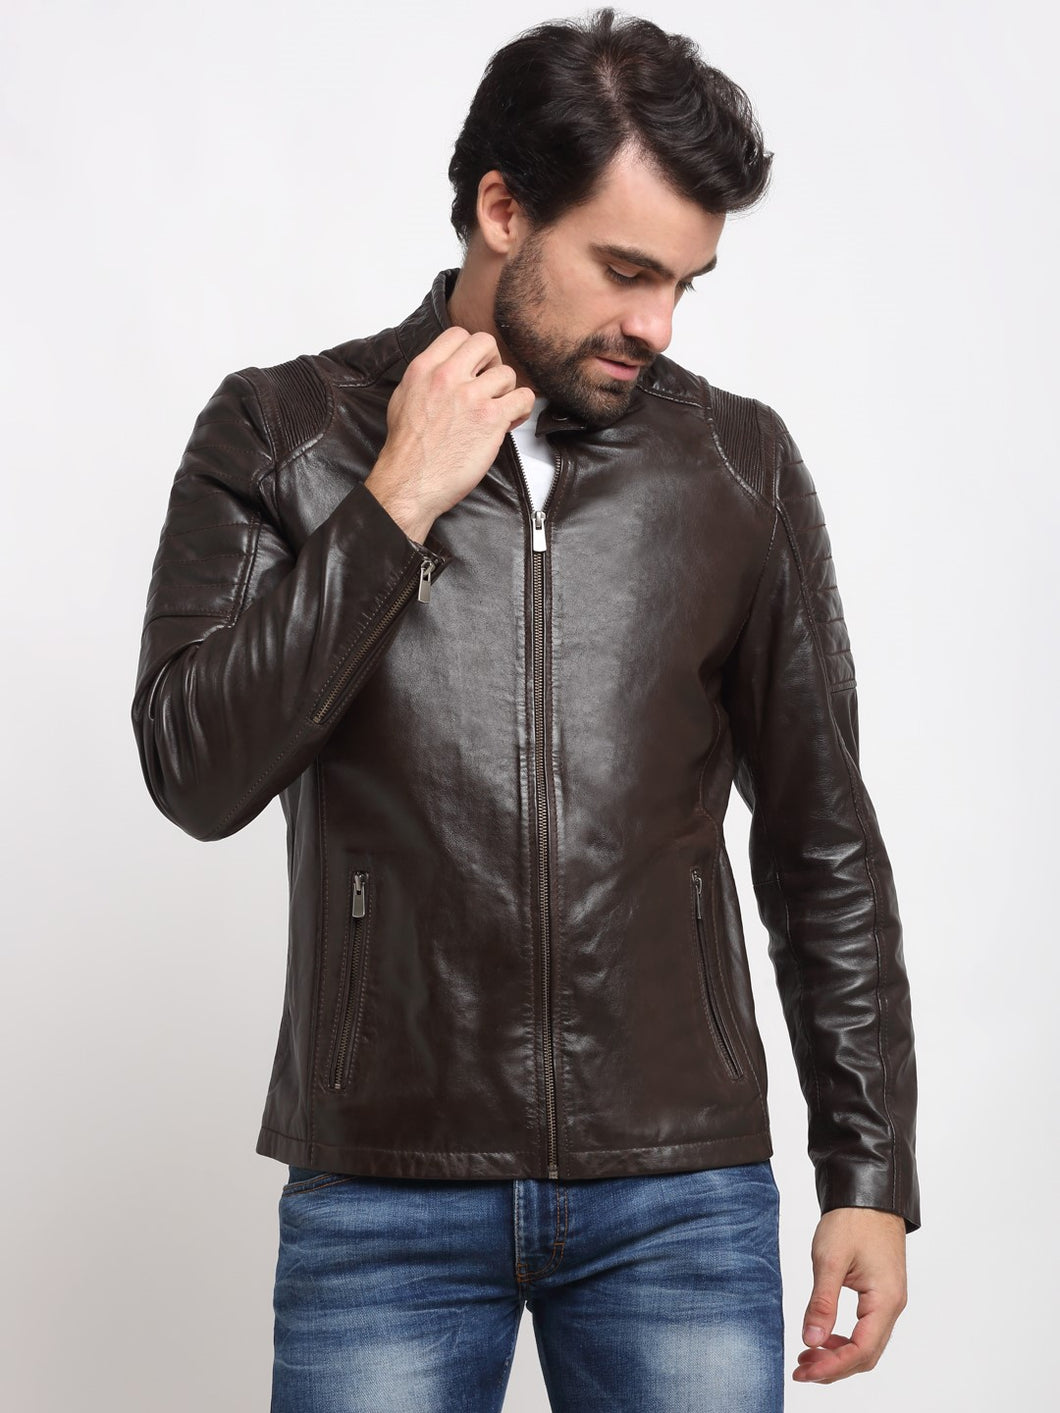 Genuine Leather Items: Shop Leather Jackets, Bags, Shoes, Belts – Teakwood  Leathers